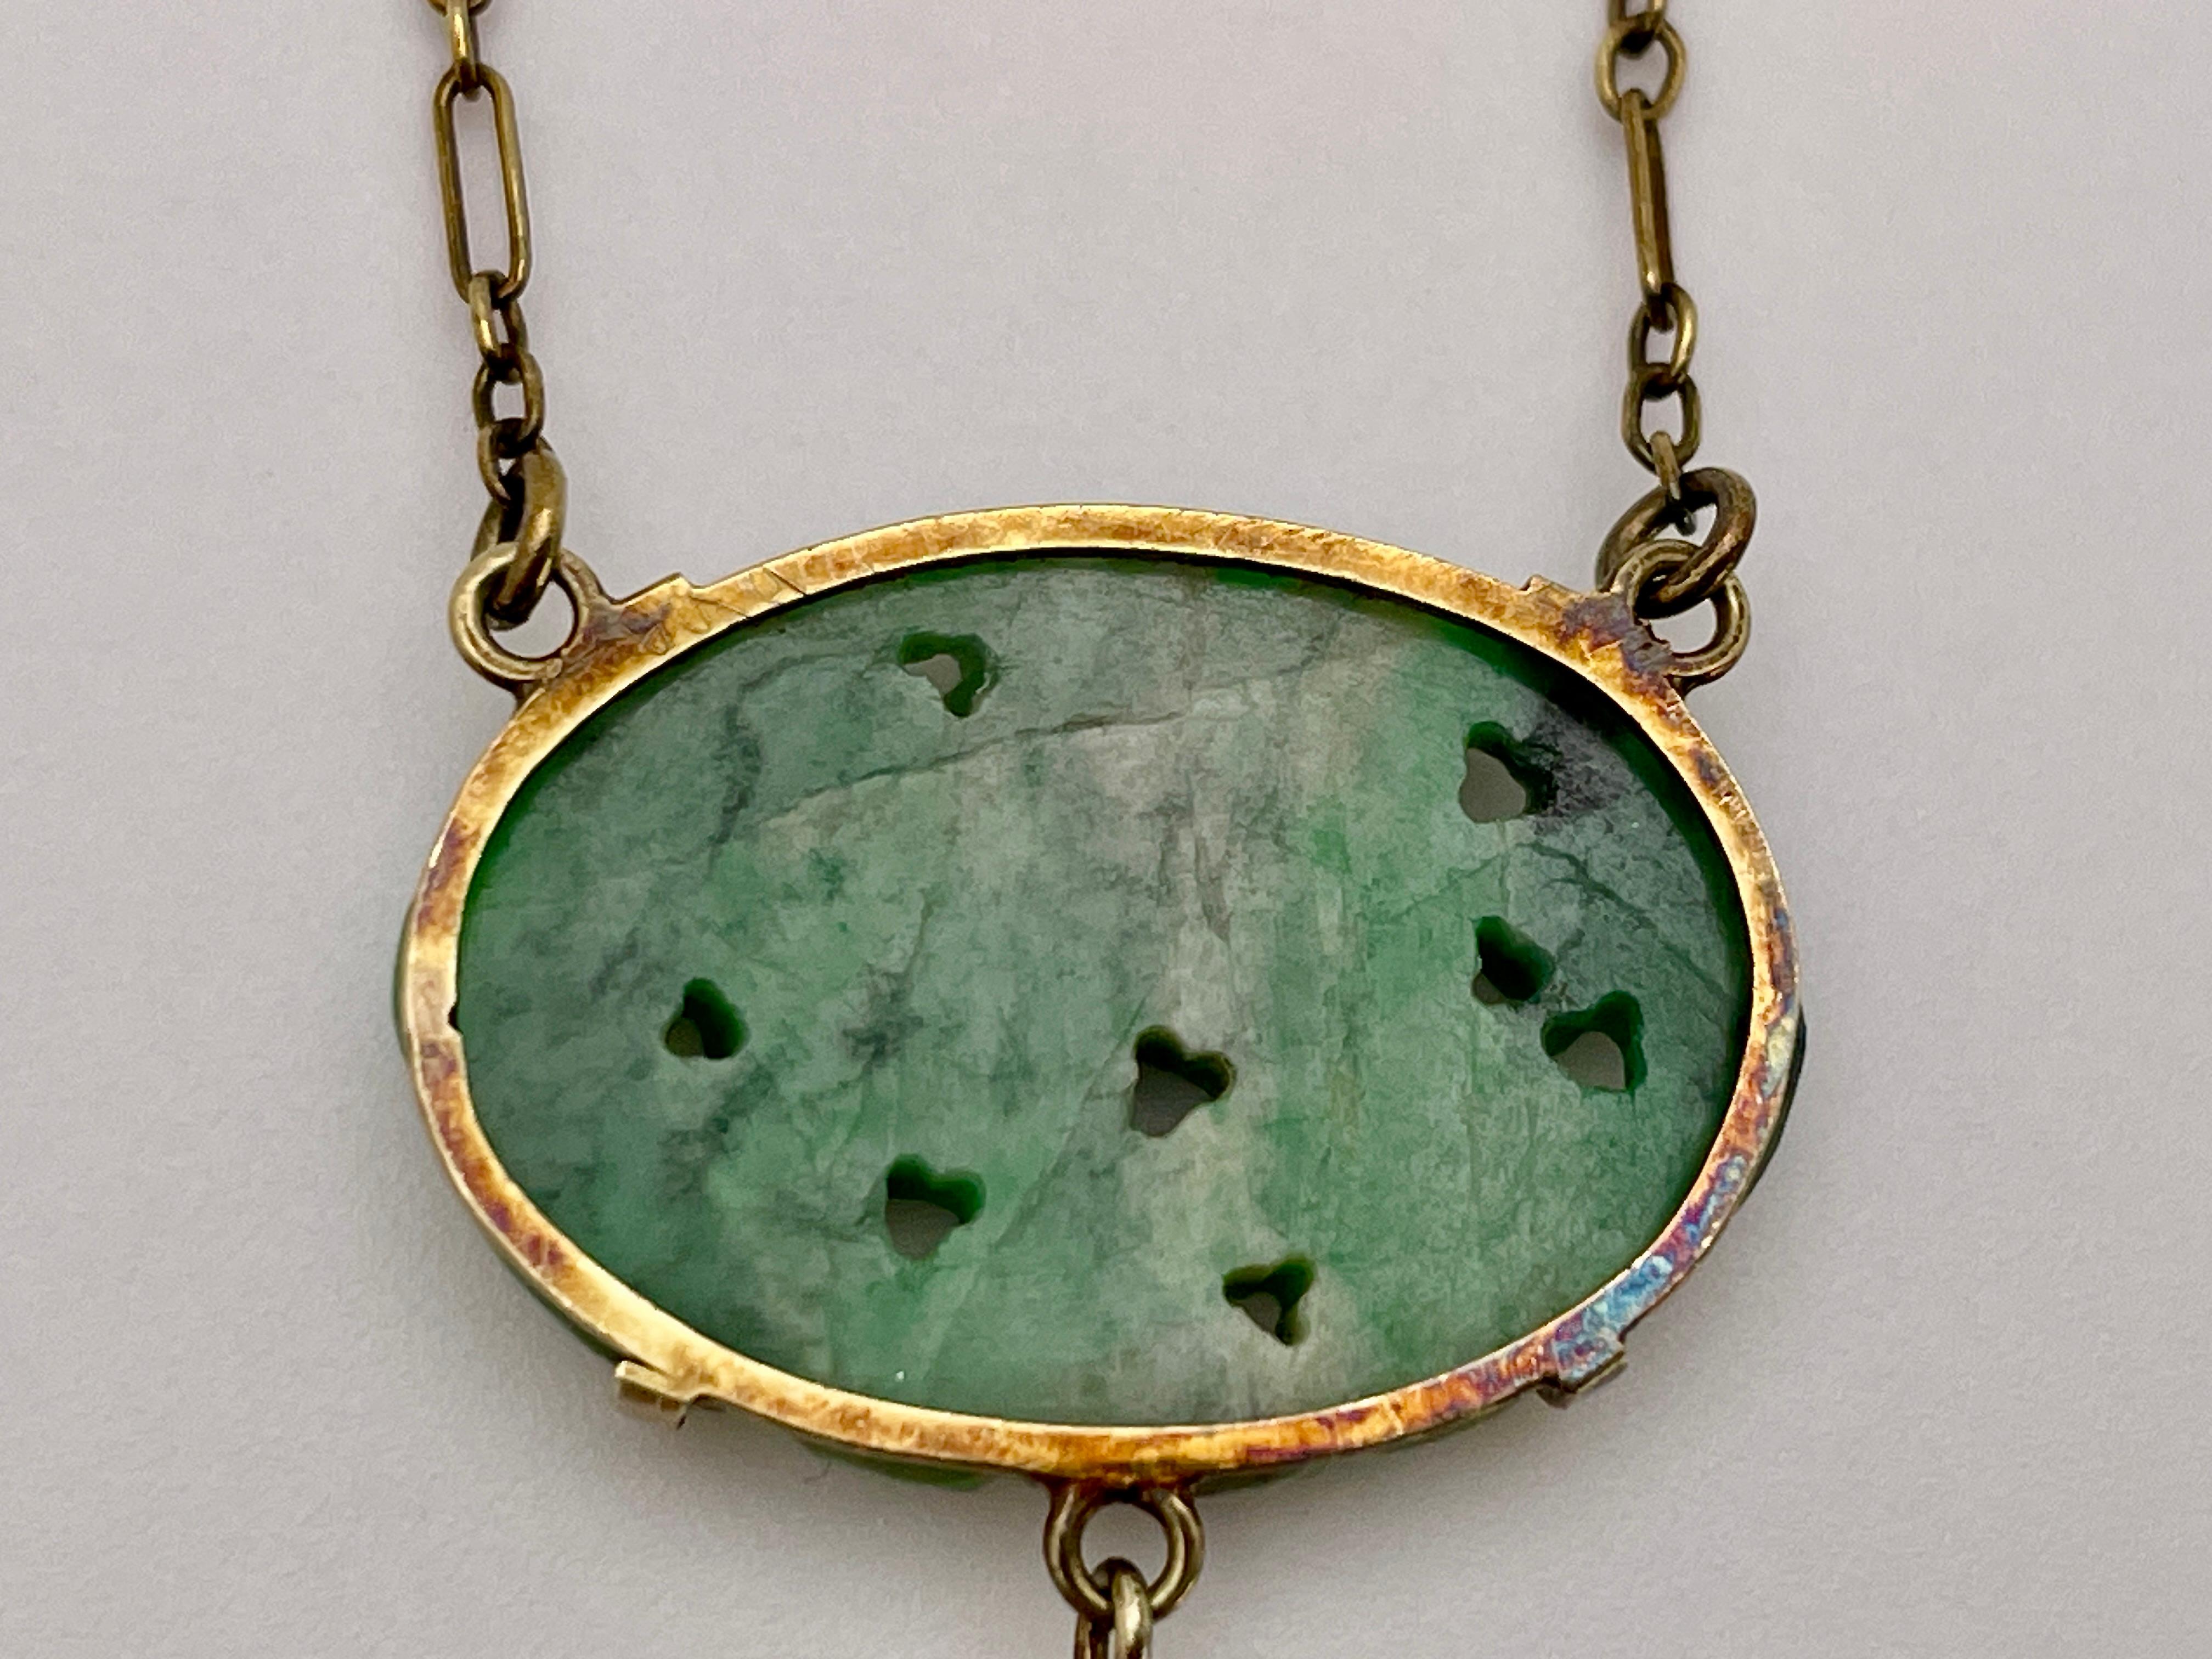 An original Victorian 14K yellow gold certified natural jade pendant. Centered with one oval carved and pierced cabochon-cut natural jade omphacite, measuring approximately 21.50 x 15.50 x 3.00 MM, weighing approximately 9.00 CT, and colored mottled